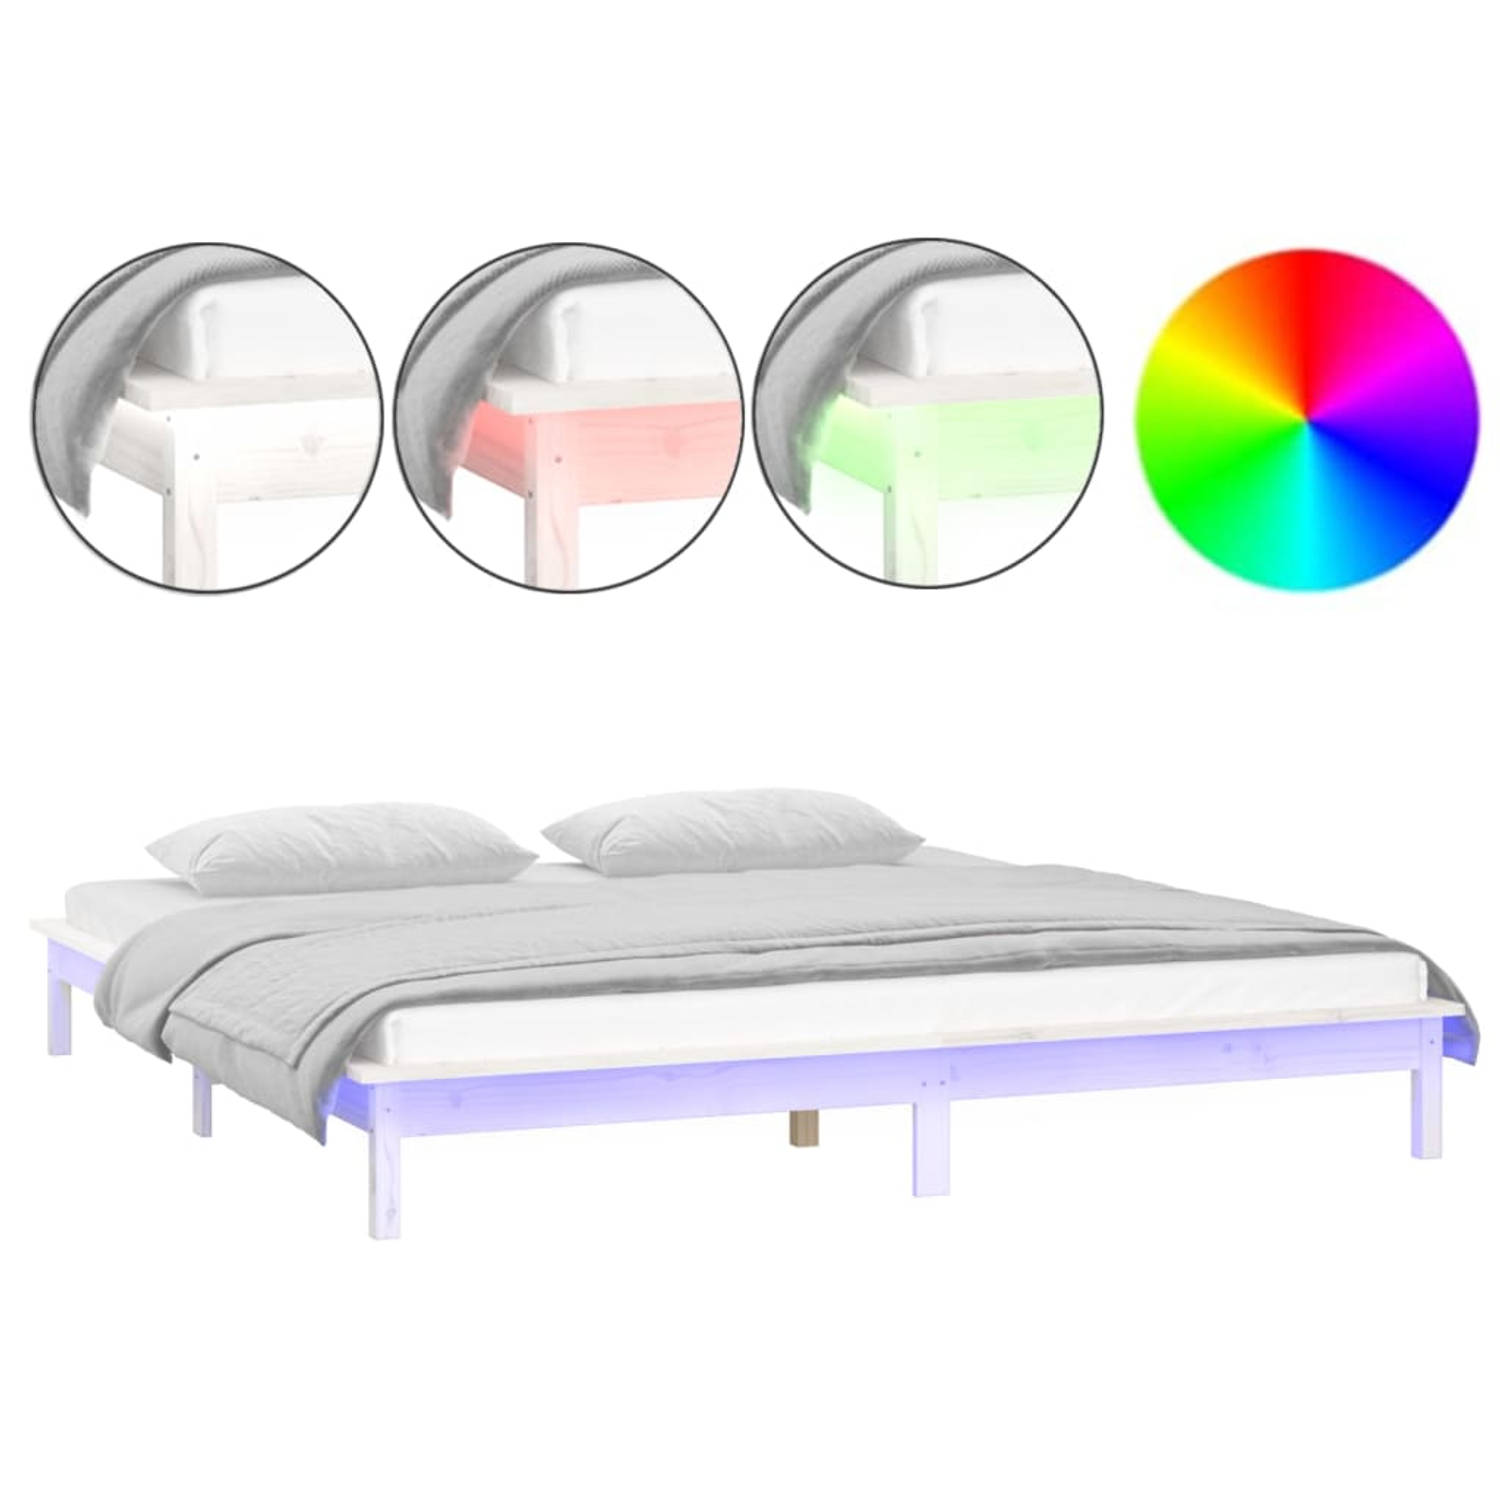 The Living Store Houten Bedframe LED-verlichting - 212x161.5x26 cm - Massief grenenhout